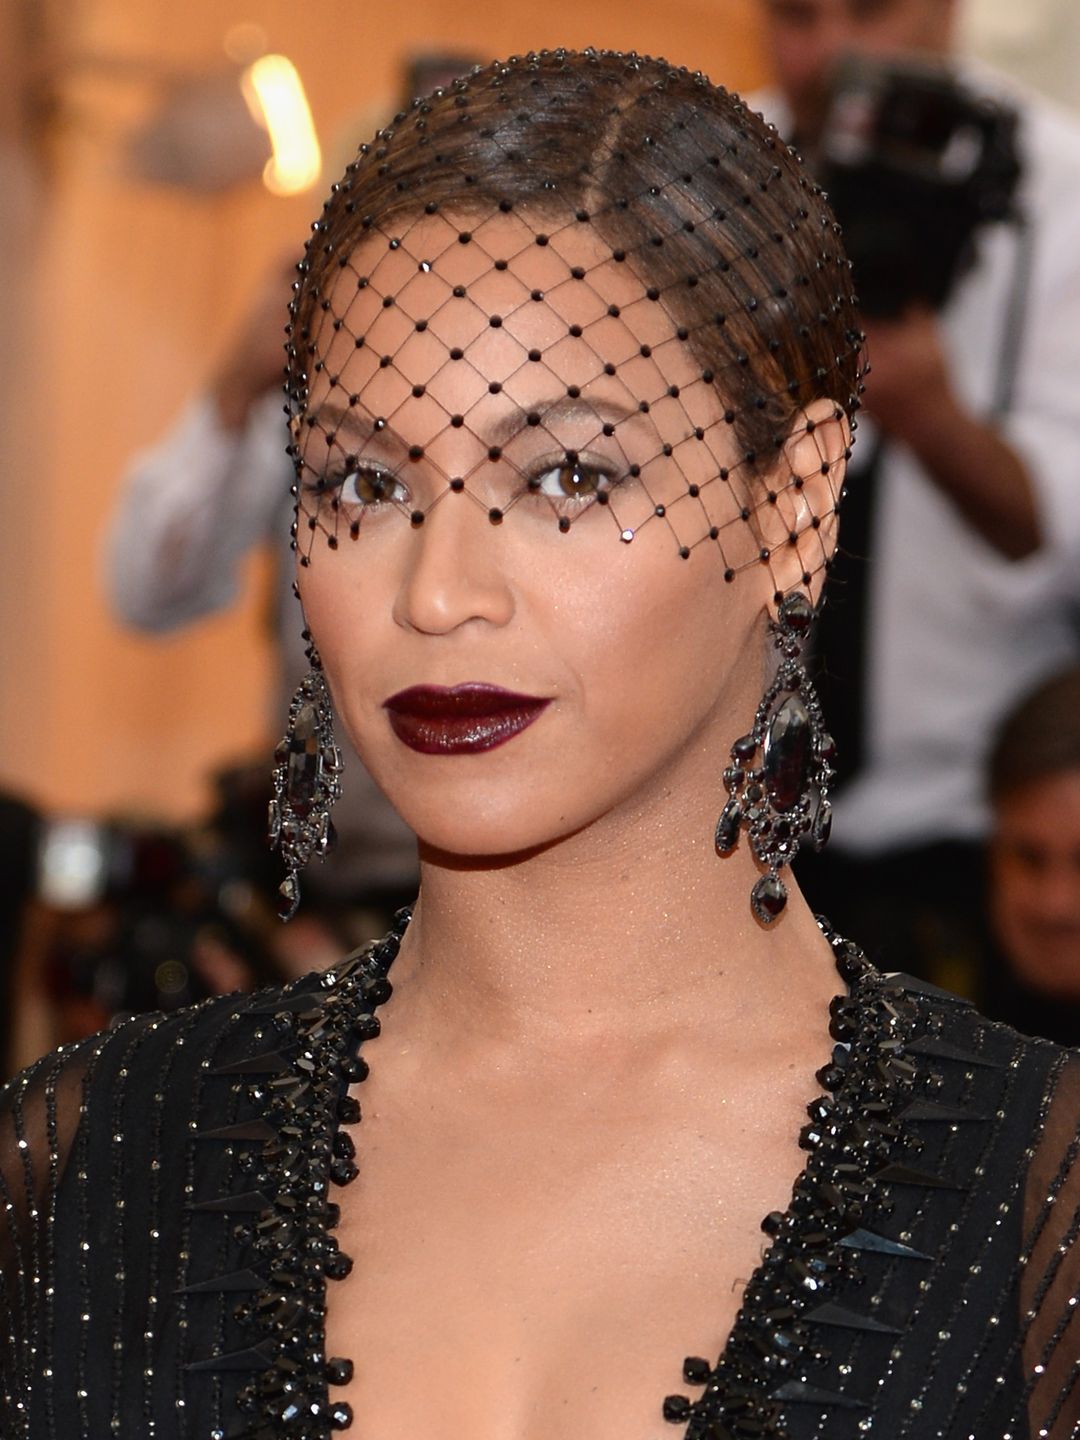 Beyoncé was giving gothic glamour 